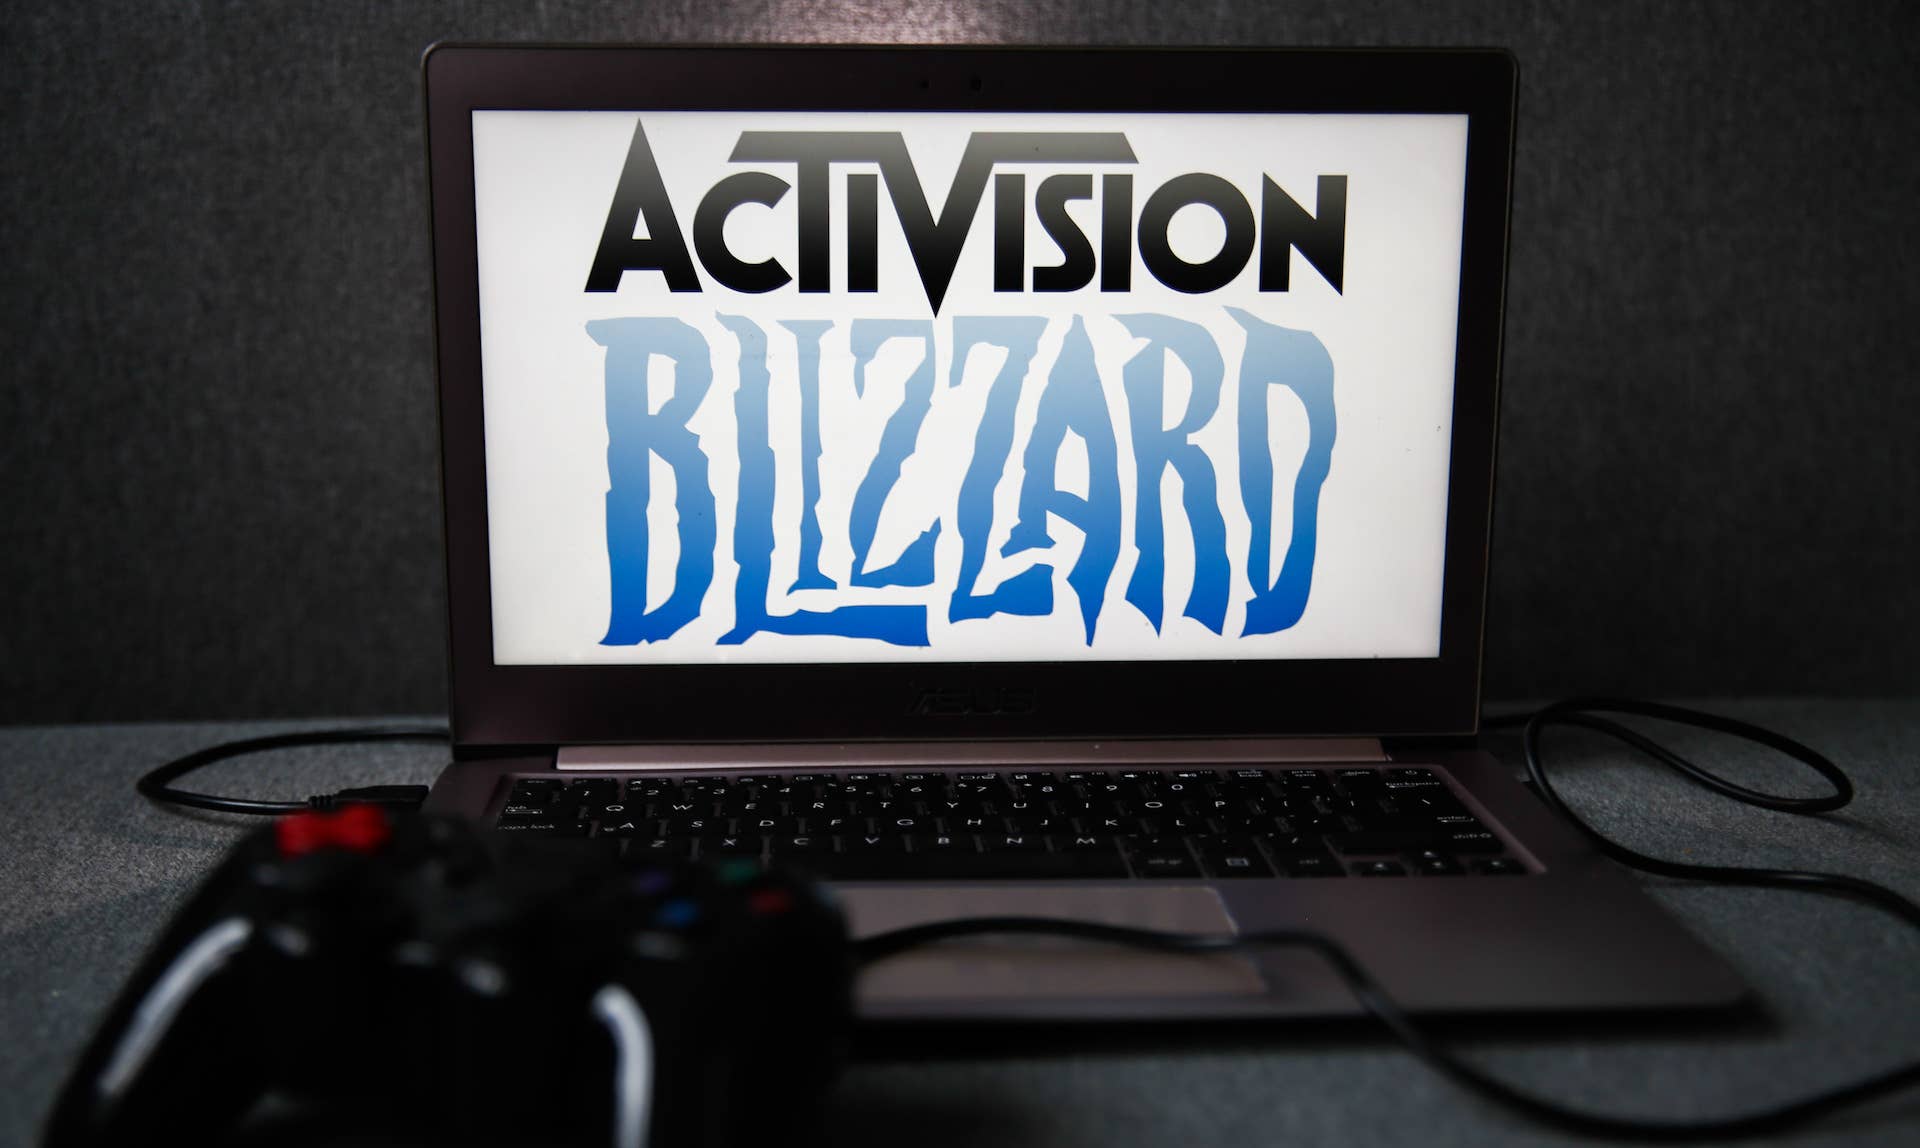 Activision and Blizzard logos